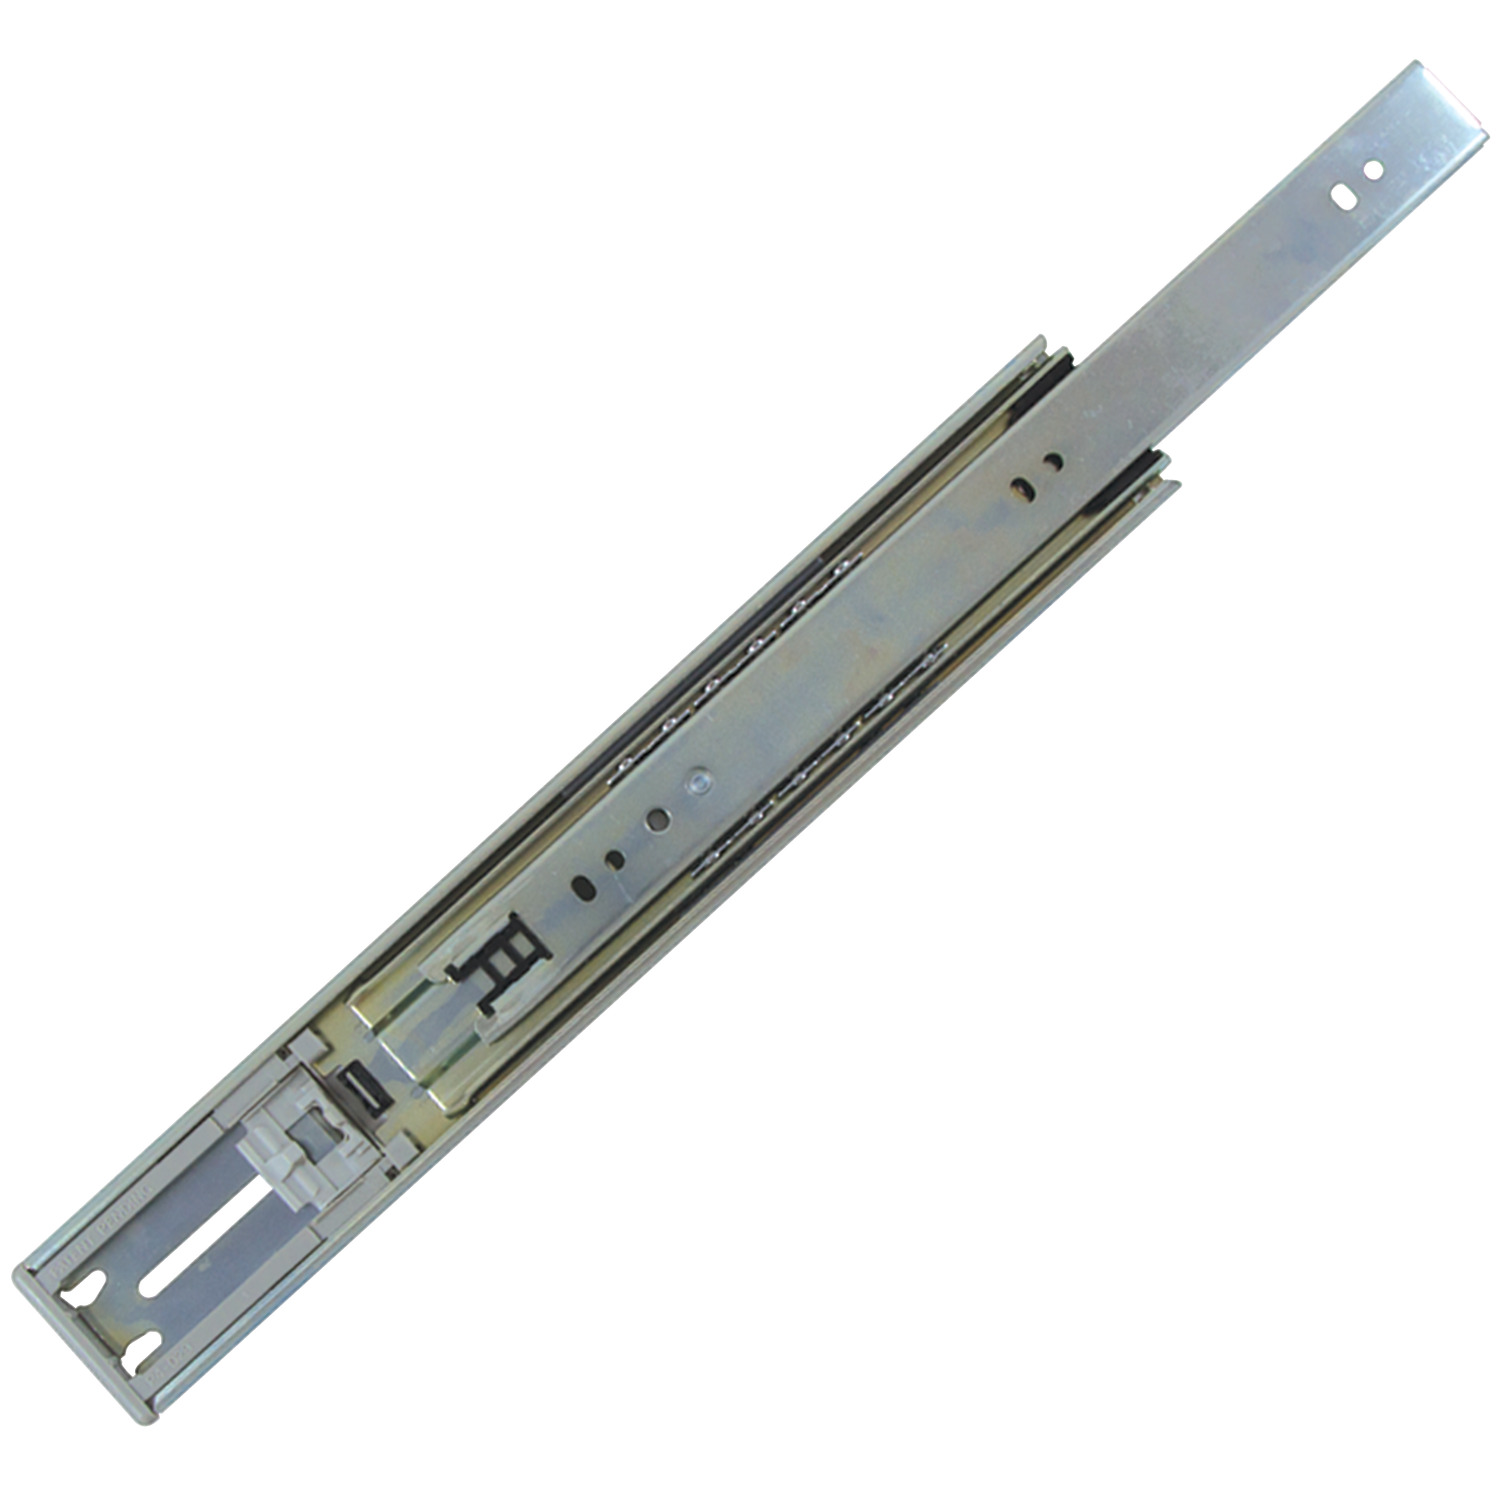 Product P4100, Drawer Slide - Full Extension lever disconnect - self-closing - 45 Kg load per pair / 